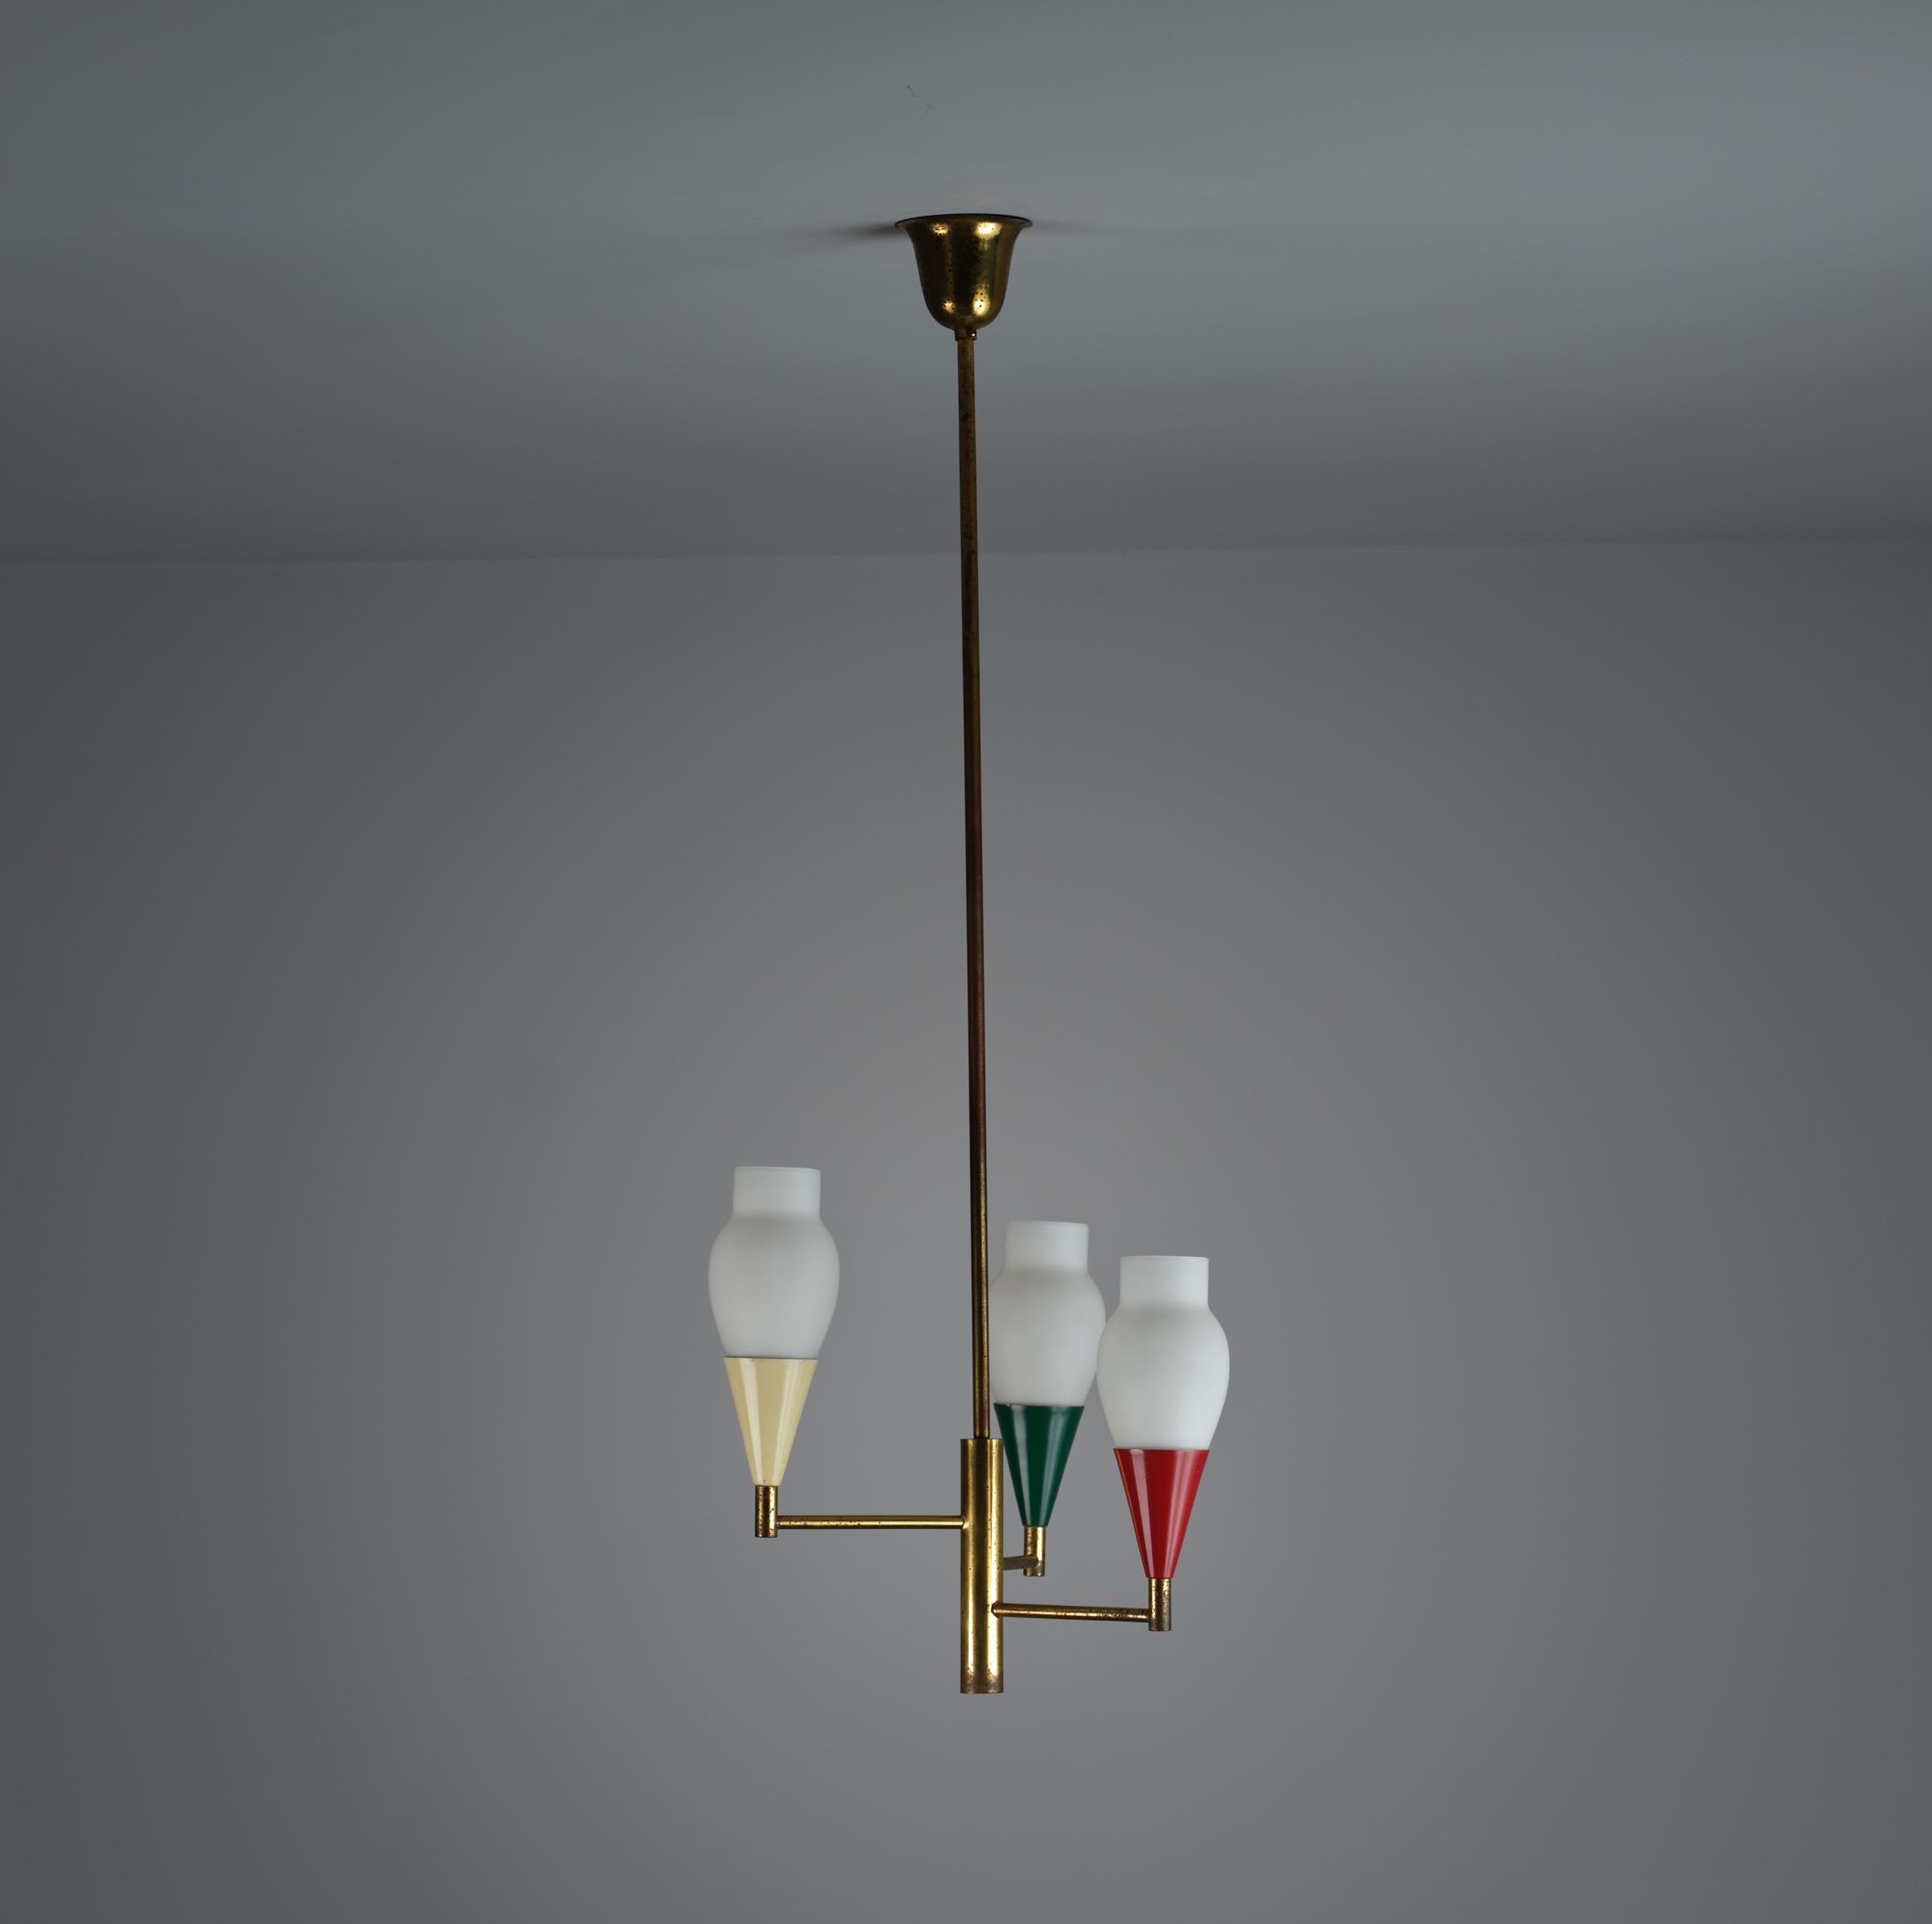 1950s Italian Brass Chandelier with Modern Design and Colorful Metal Accents For Sale 2